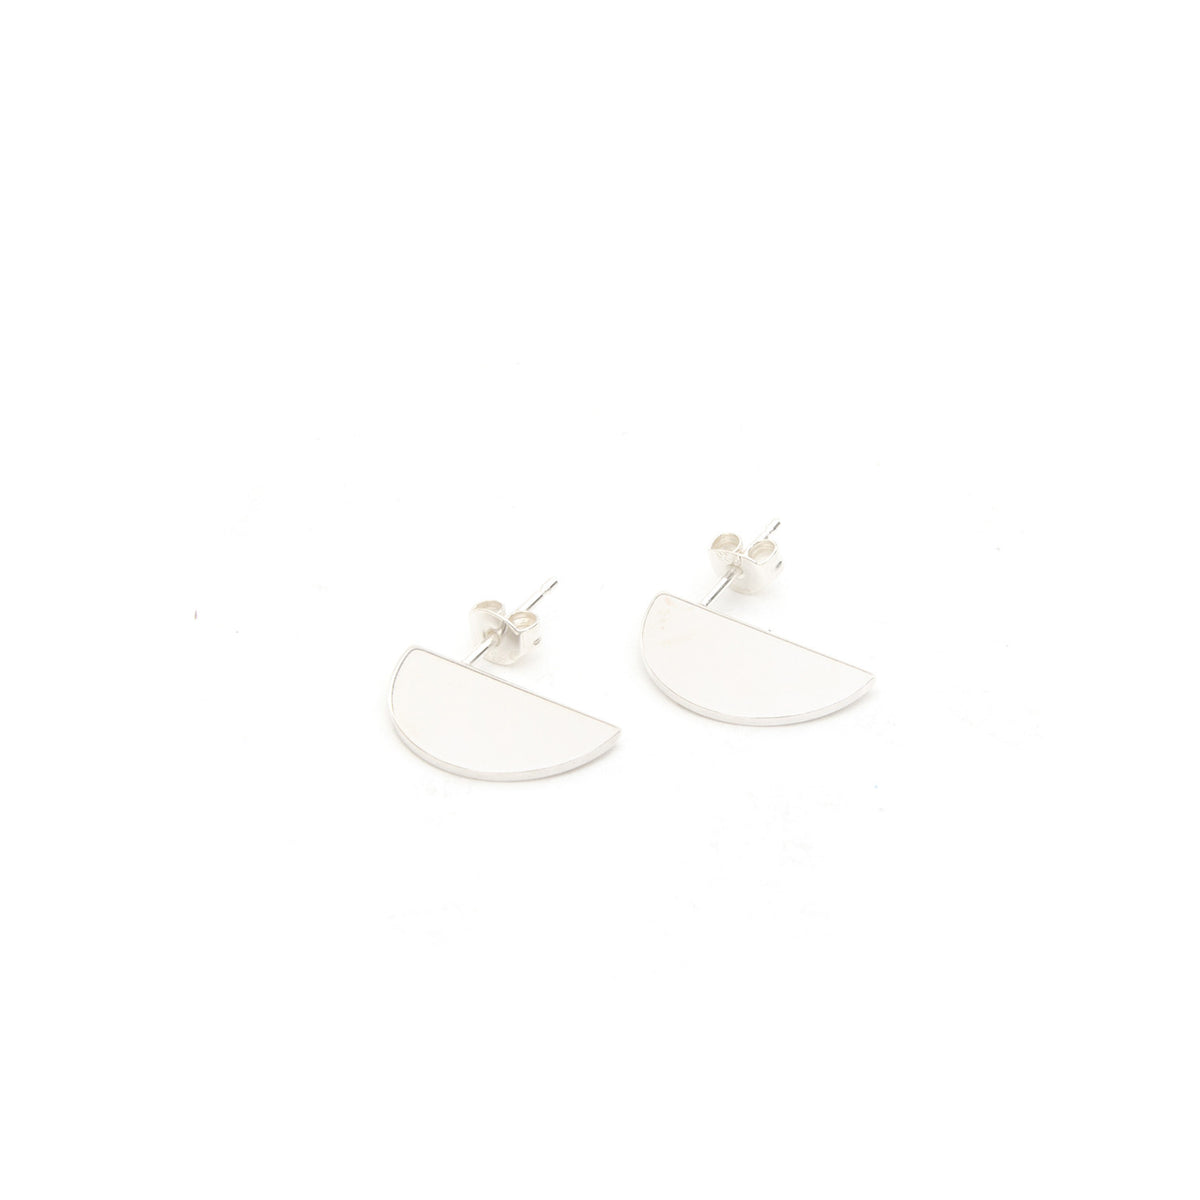 The Boyscouts Earring 'Crescent' (Pair) Sterling Silver - Concrete